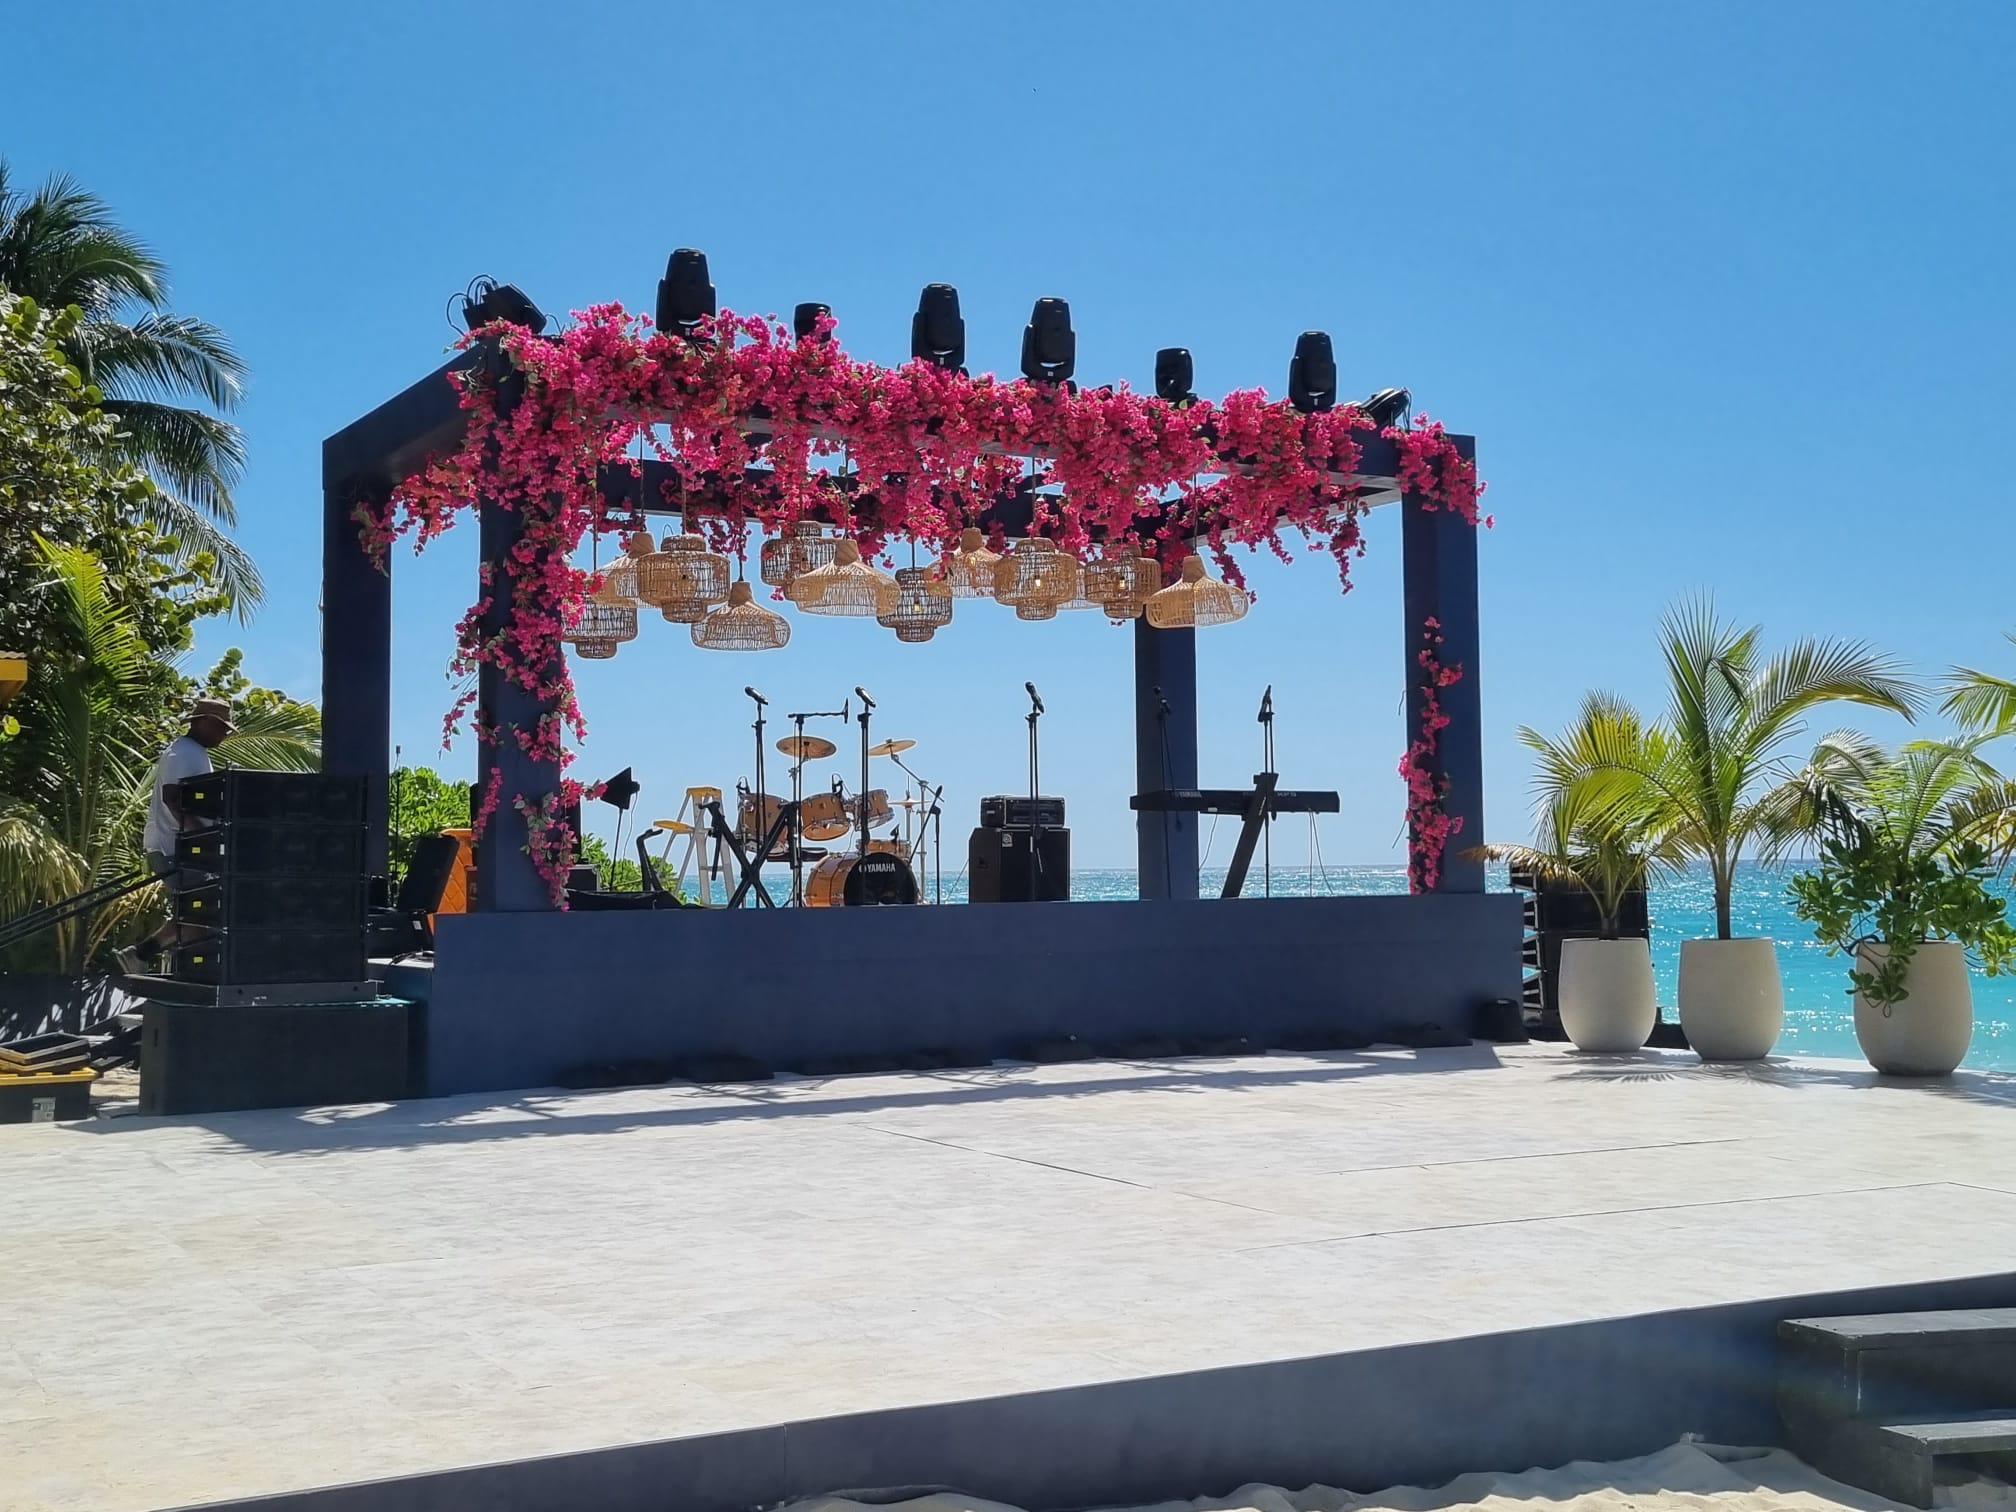 An image showing a stage design adorned with bougainvillea for a wedding party 